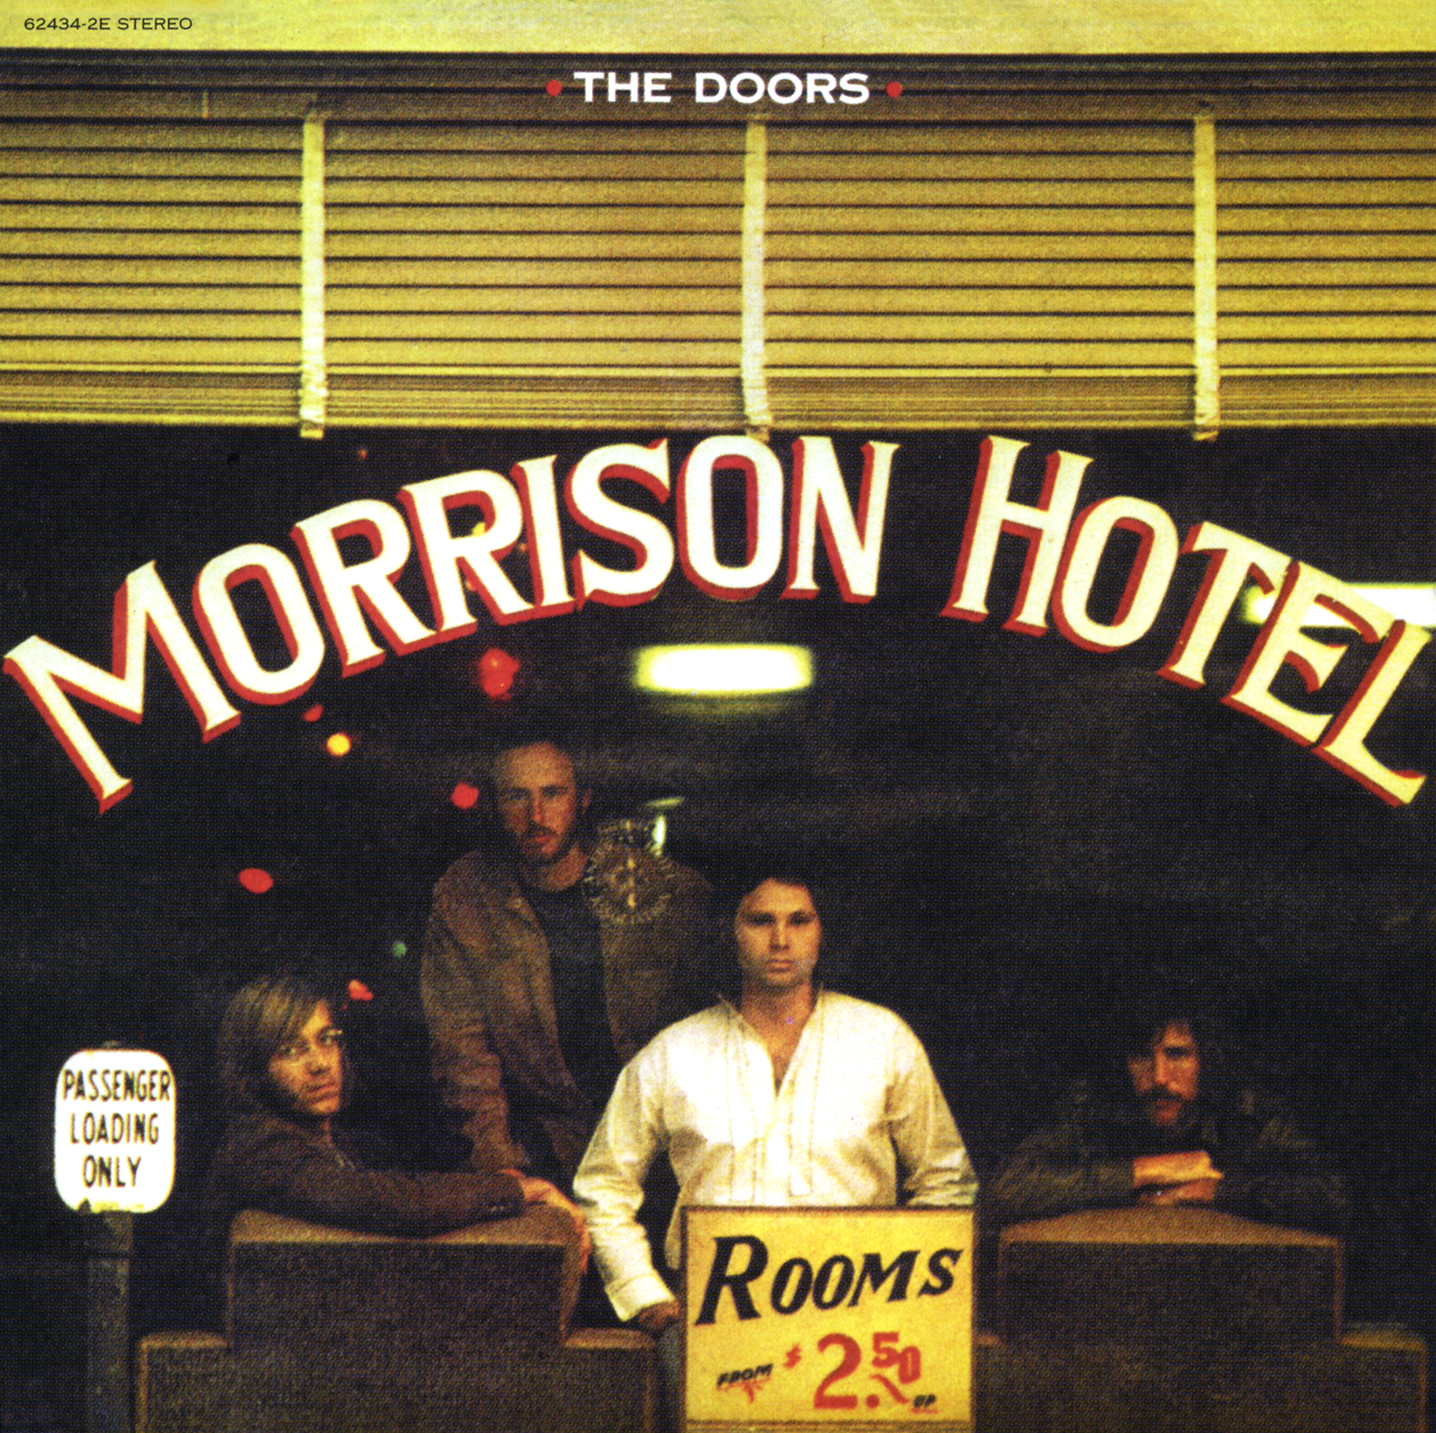 Doors, The - Morrison Hotel cover